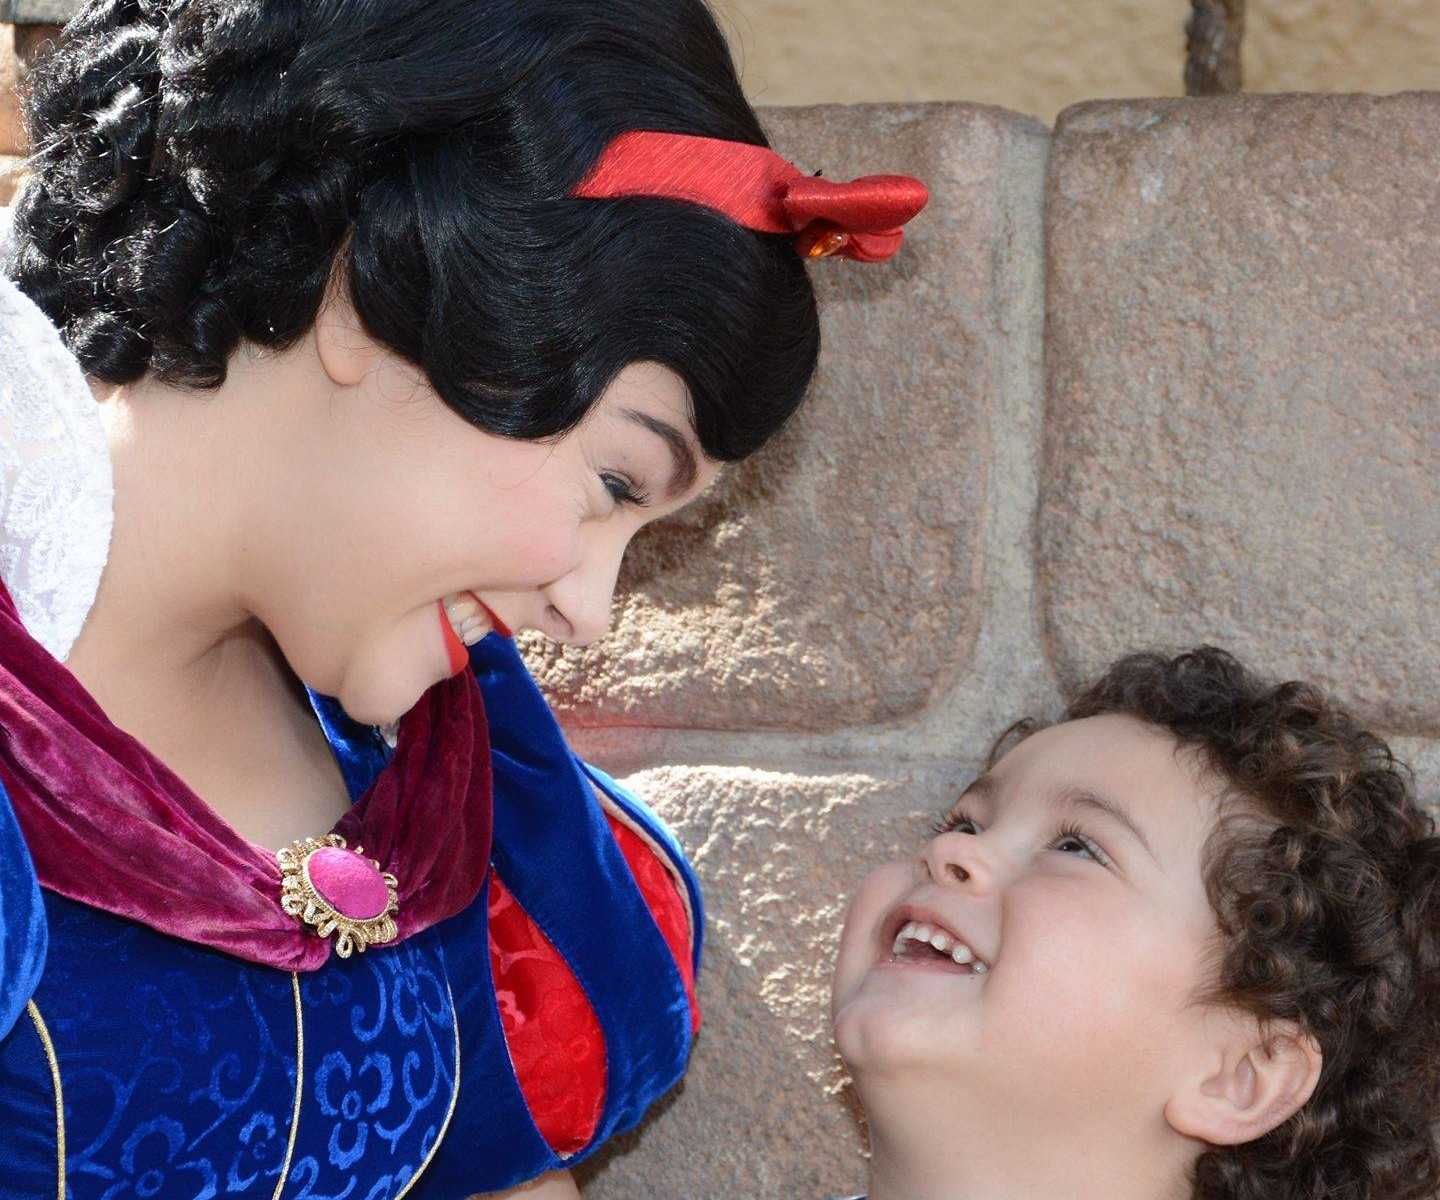 Toddler and Snow White smile at each other at Disney World